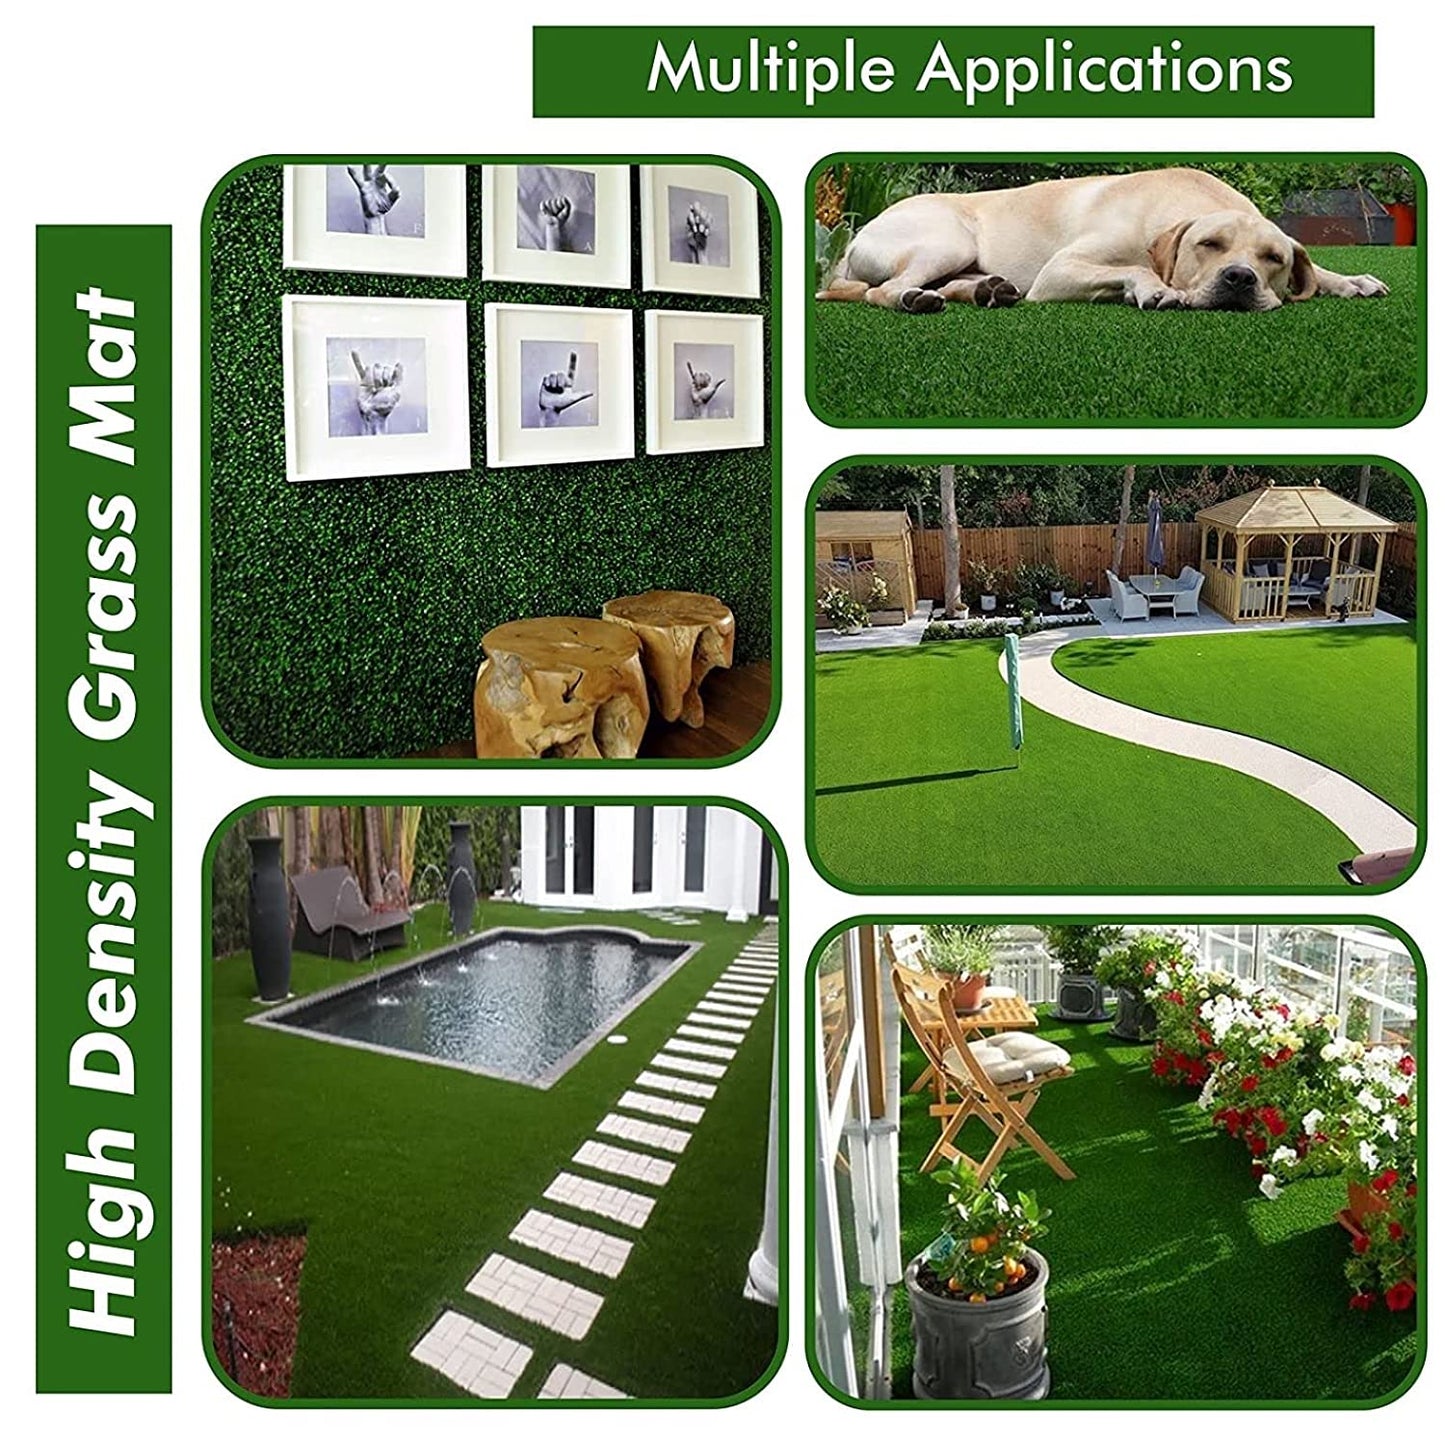 Carpets: Waterproof Artificial Grass Carpet For Home and Office